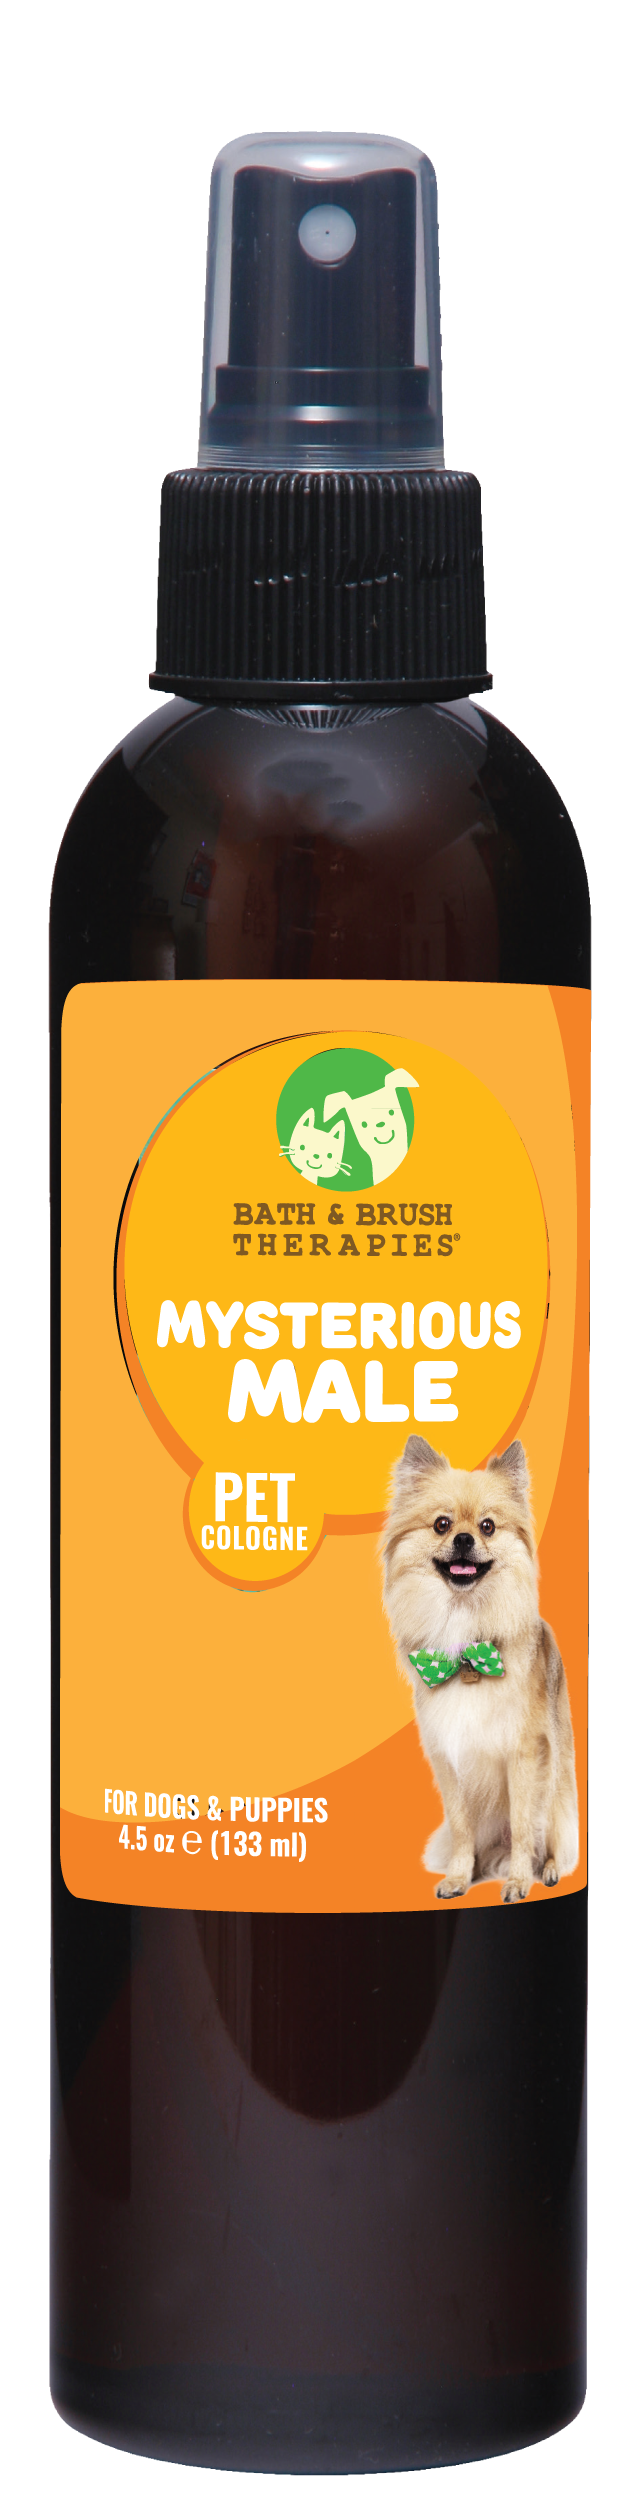 Mysterious Male Pet® Cologne